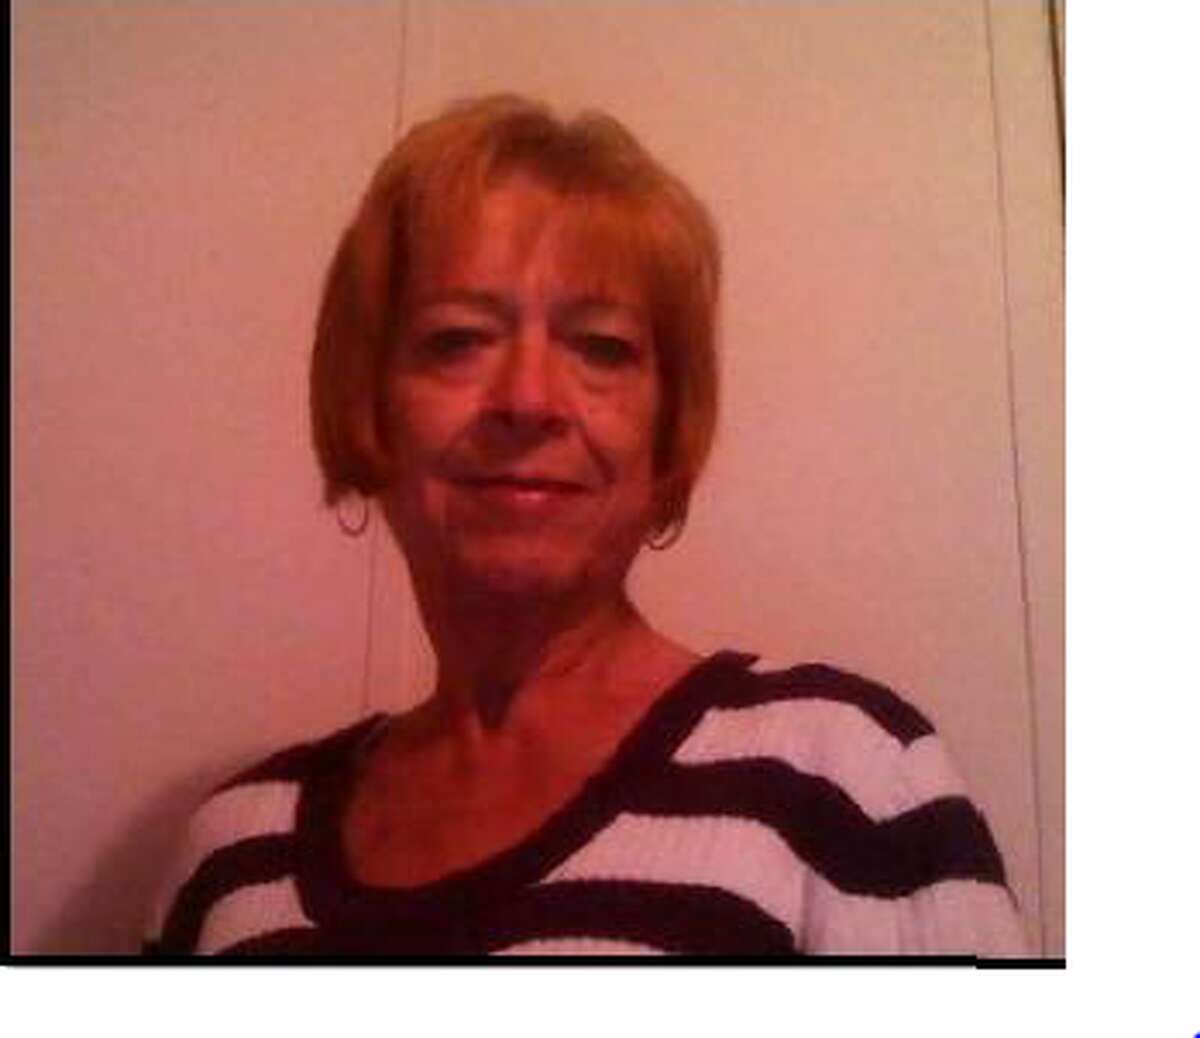 A 70-year-old Atascocita woman has gone missing from her apartment home, according to the Harris County Sheriff's Office.